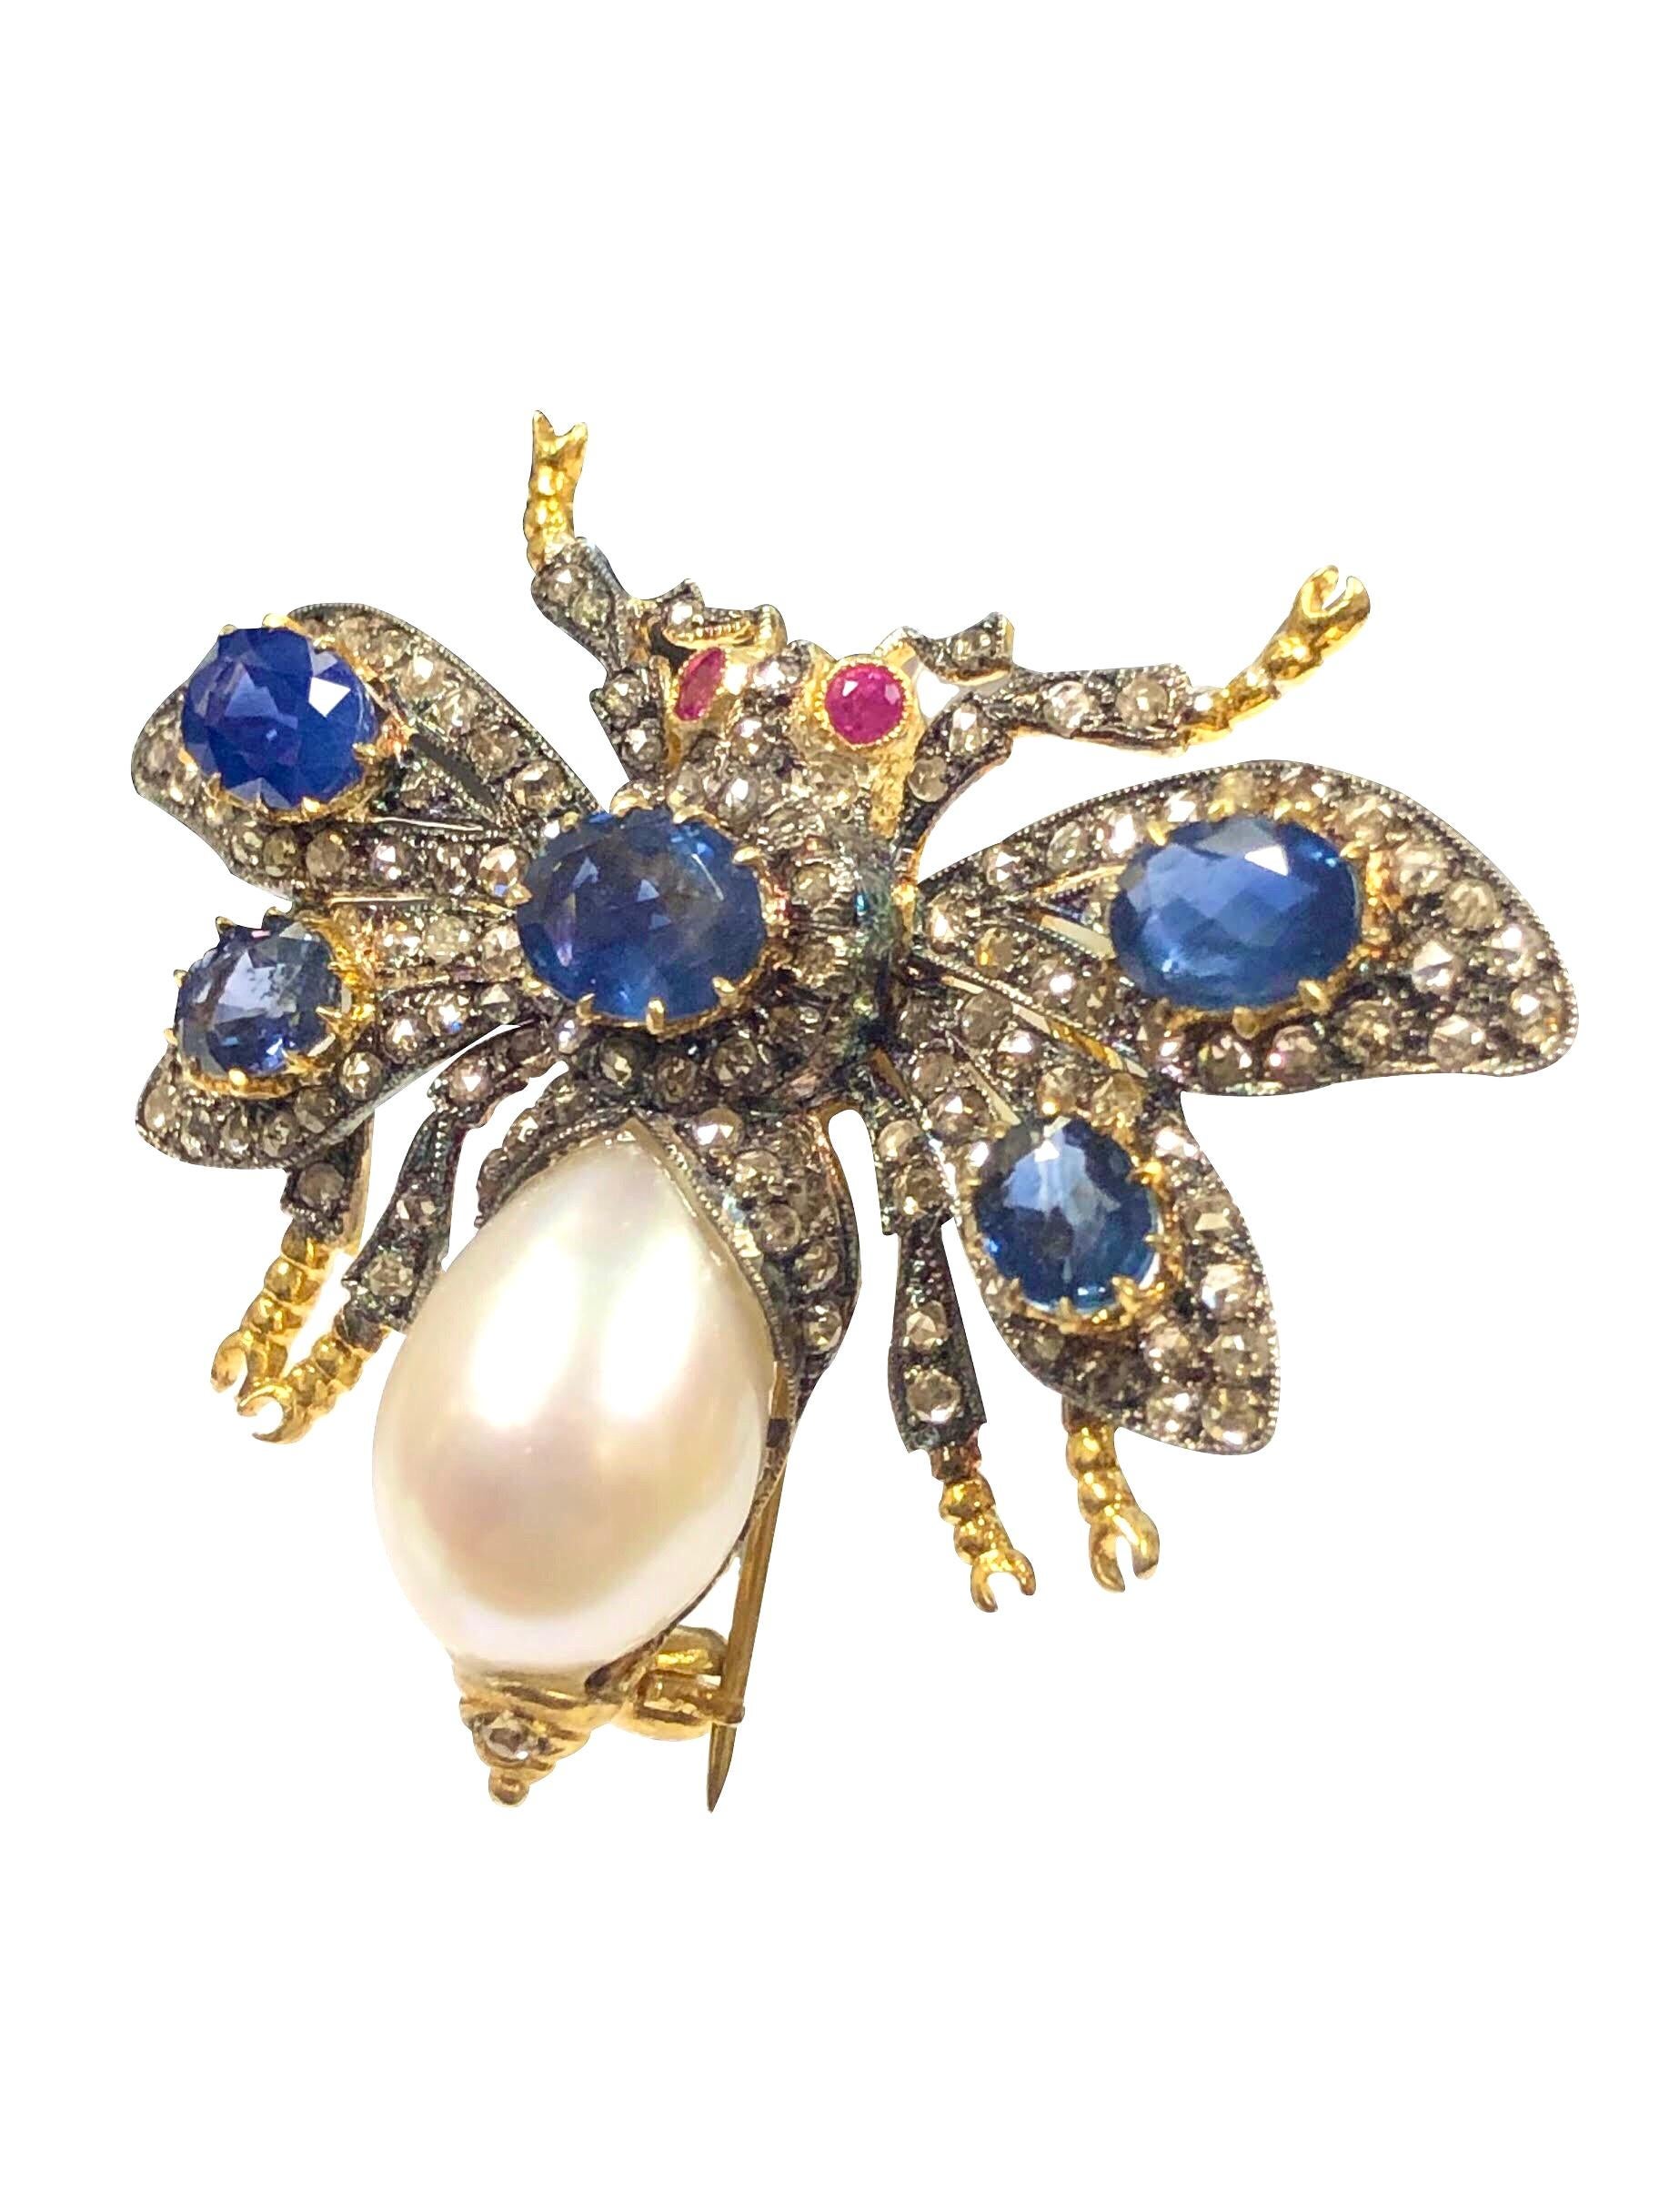 Silver top with Gold back Bug Brooch, measuring 2 inches from Wing end to end and 1 3/4 inches in length, set with a 15 X 10 M.M. Pearl for the body, Ruby Eyes and The movable wings are further set with Rose Cut Diamonds totaling approximately 2